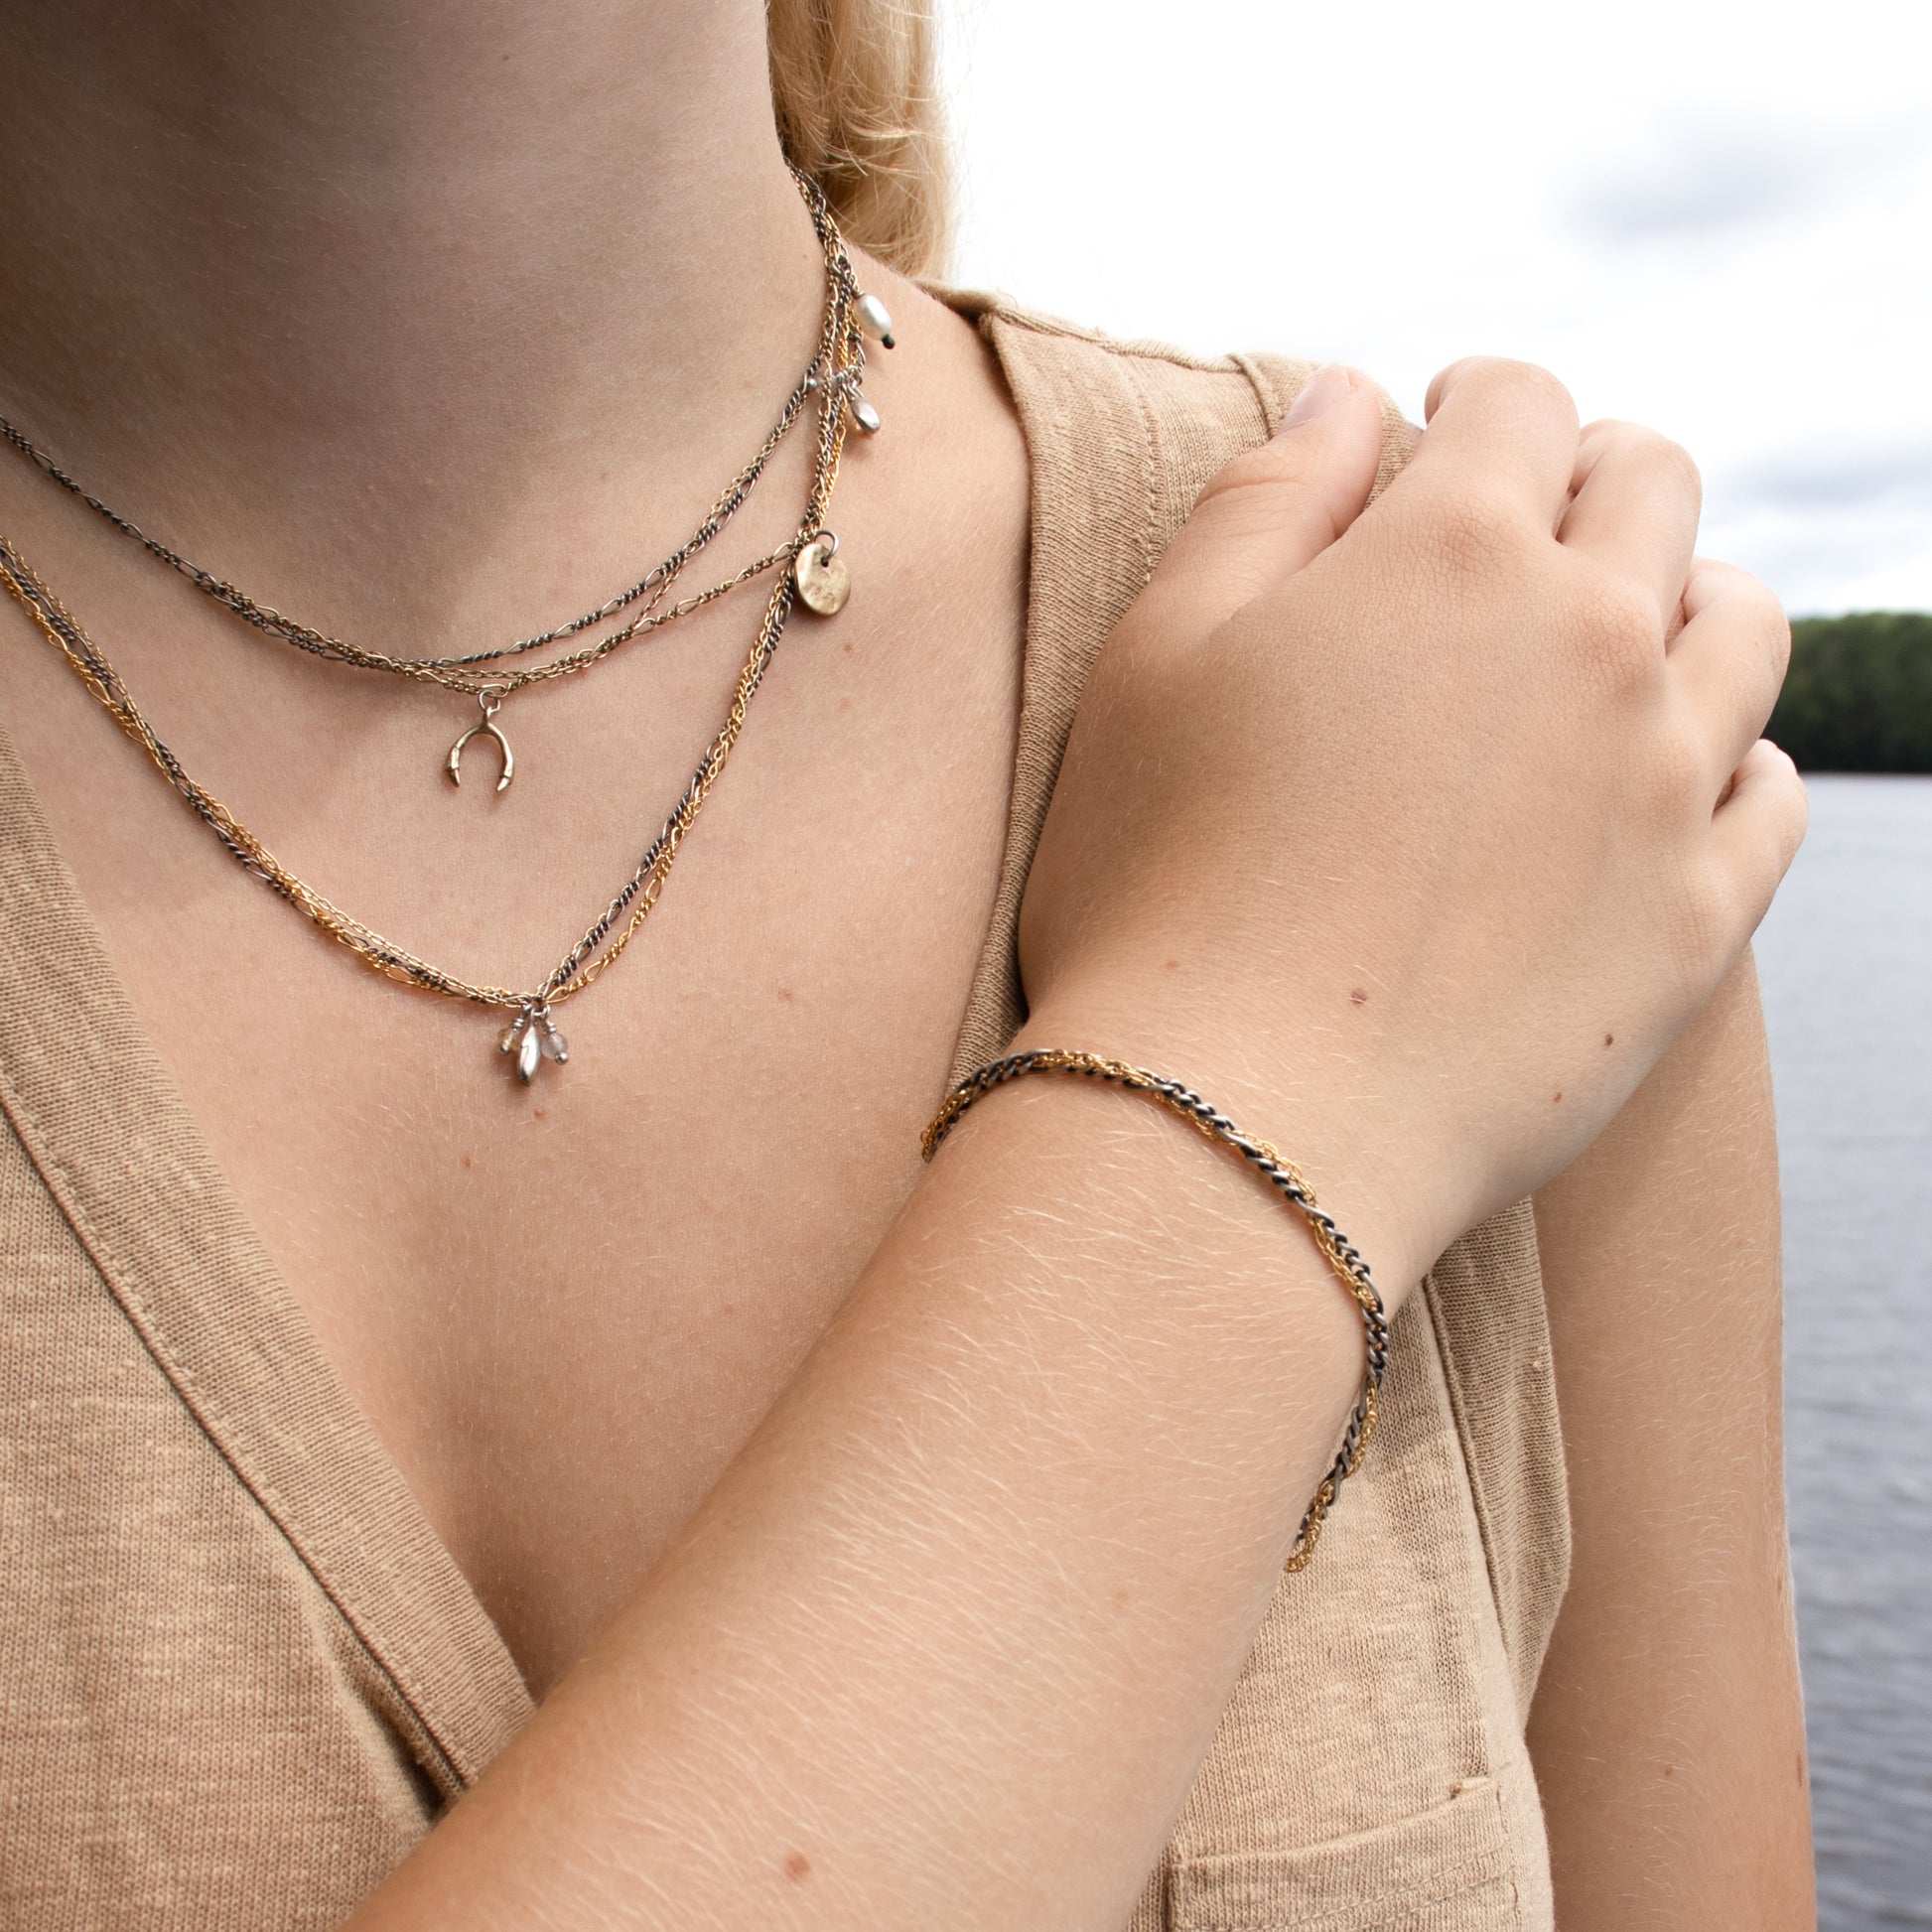 Hand-threaded reclaimed sterling silver and gold-filled mixed-chain bracelet 7 inches in diameter with our signature sterling silver Kria tag handmade and finished in our Catskills store-studio shown on model with mixed-chain charm necklaces.